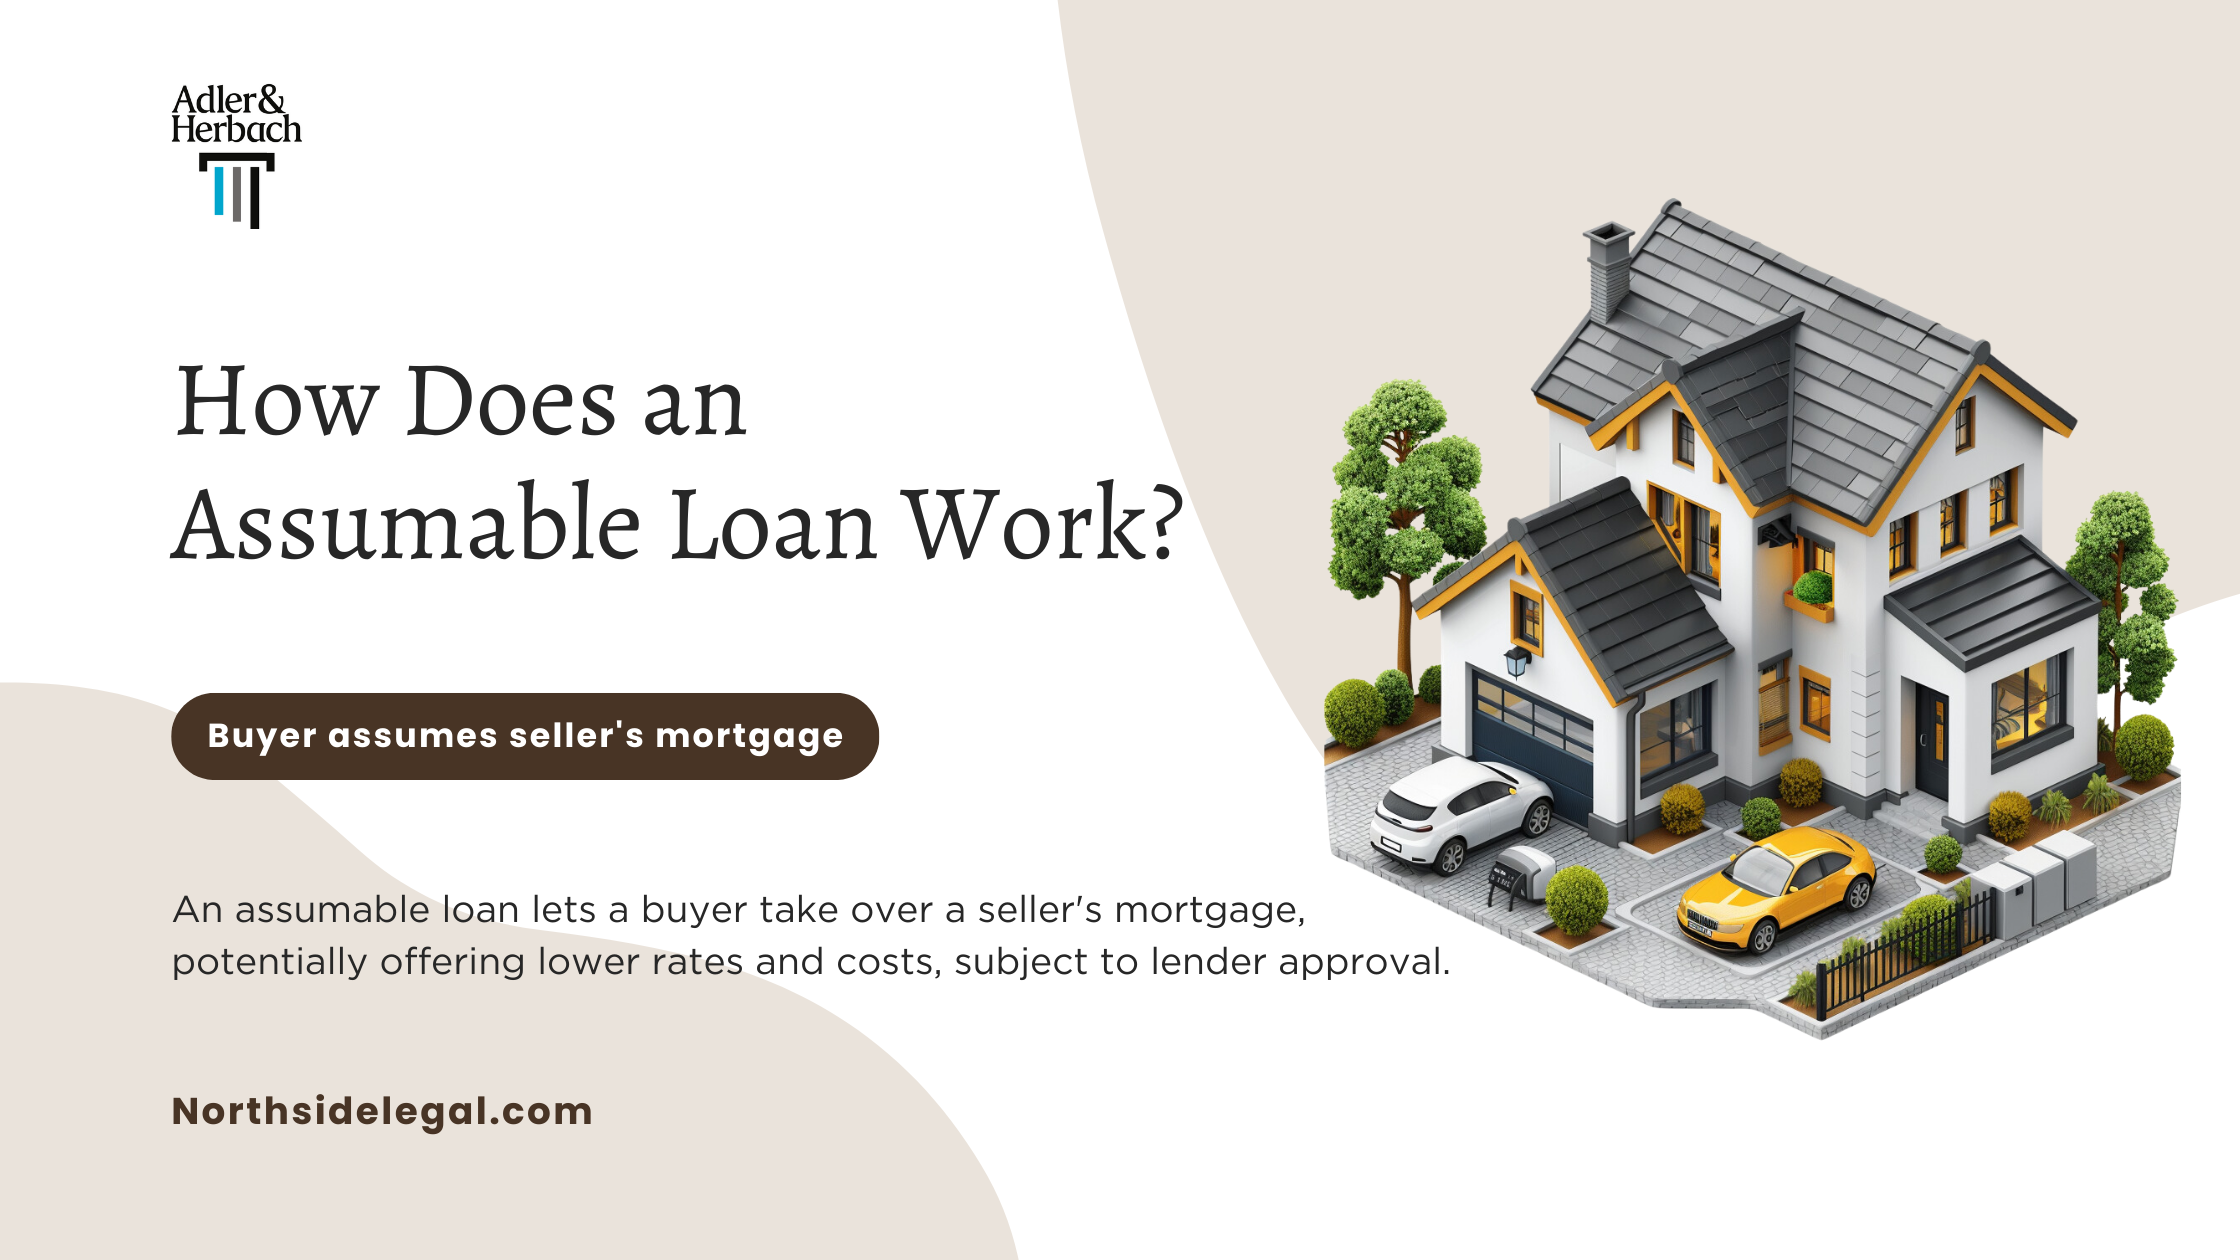 How does an assumable loan work? An assumable loan lets a buyer take over a seller's mortgage, potentially offering lower rates and costs, subject to lender approval.